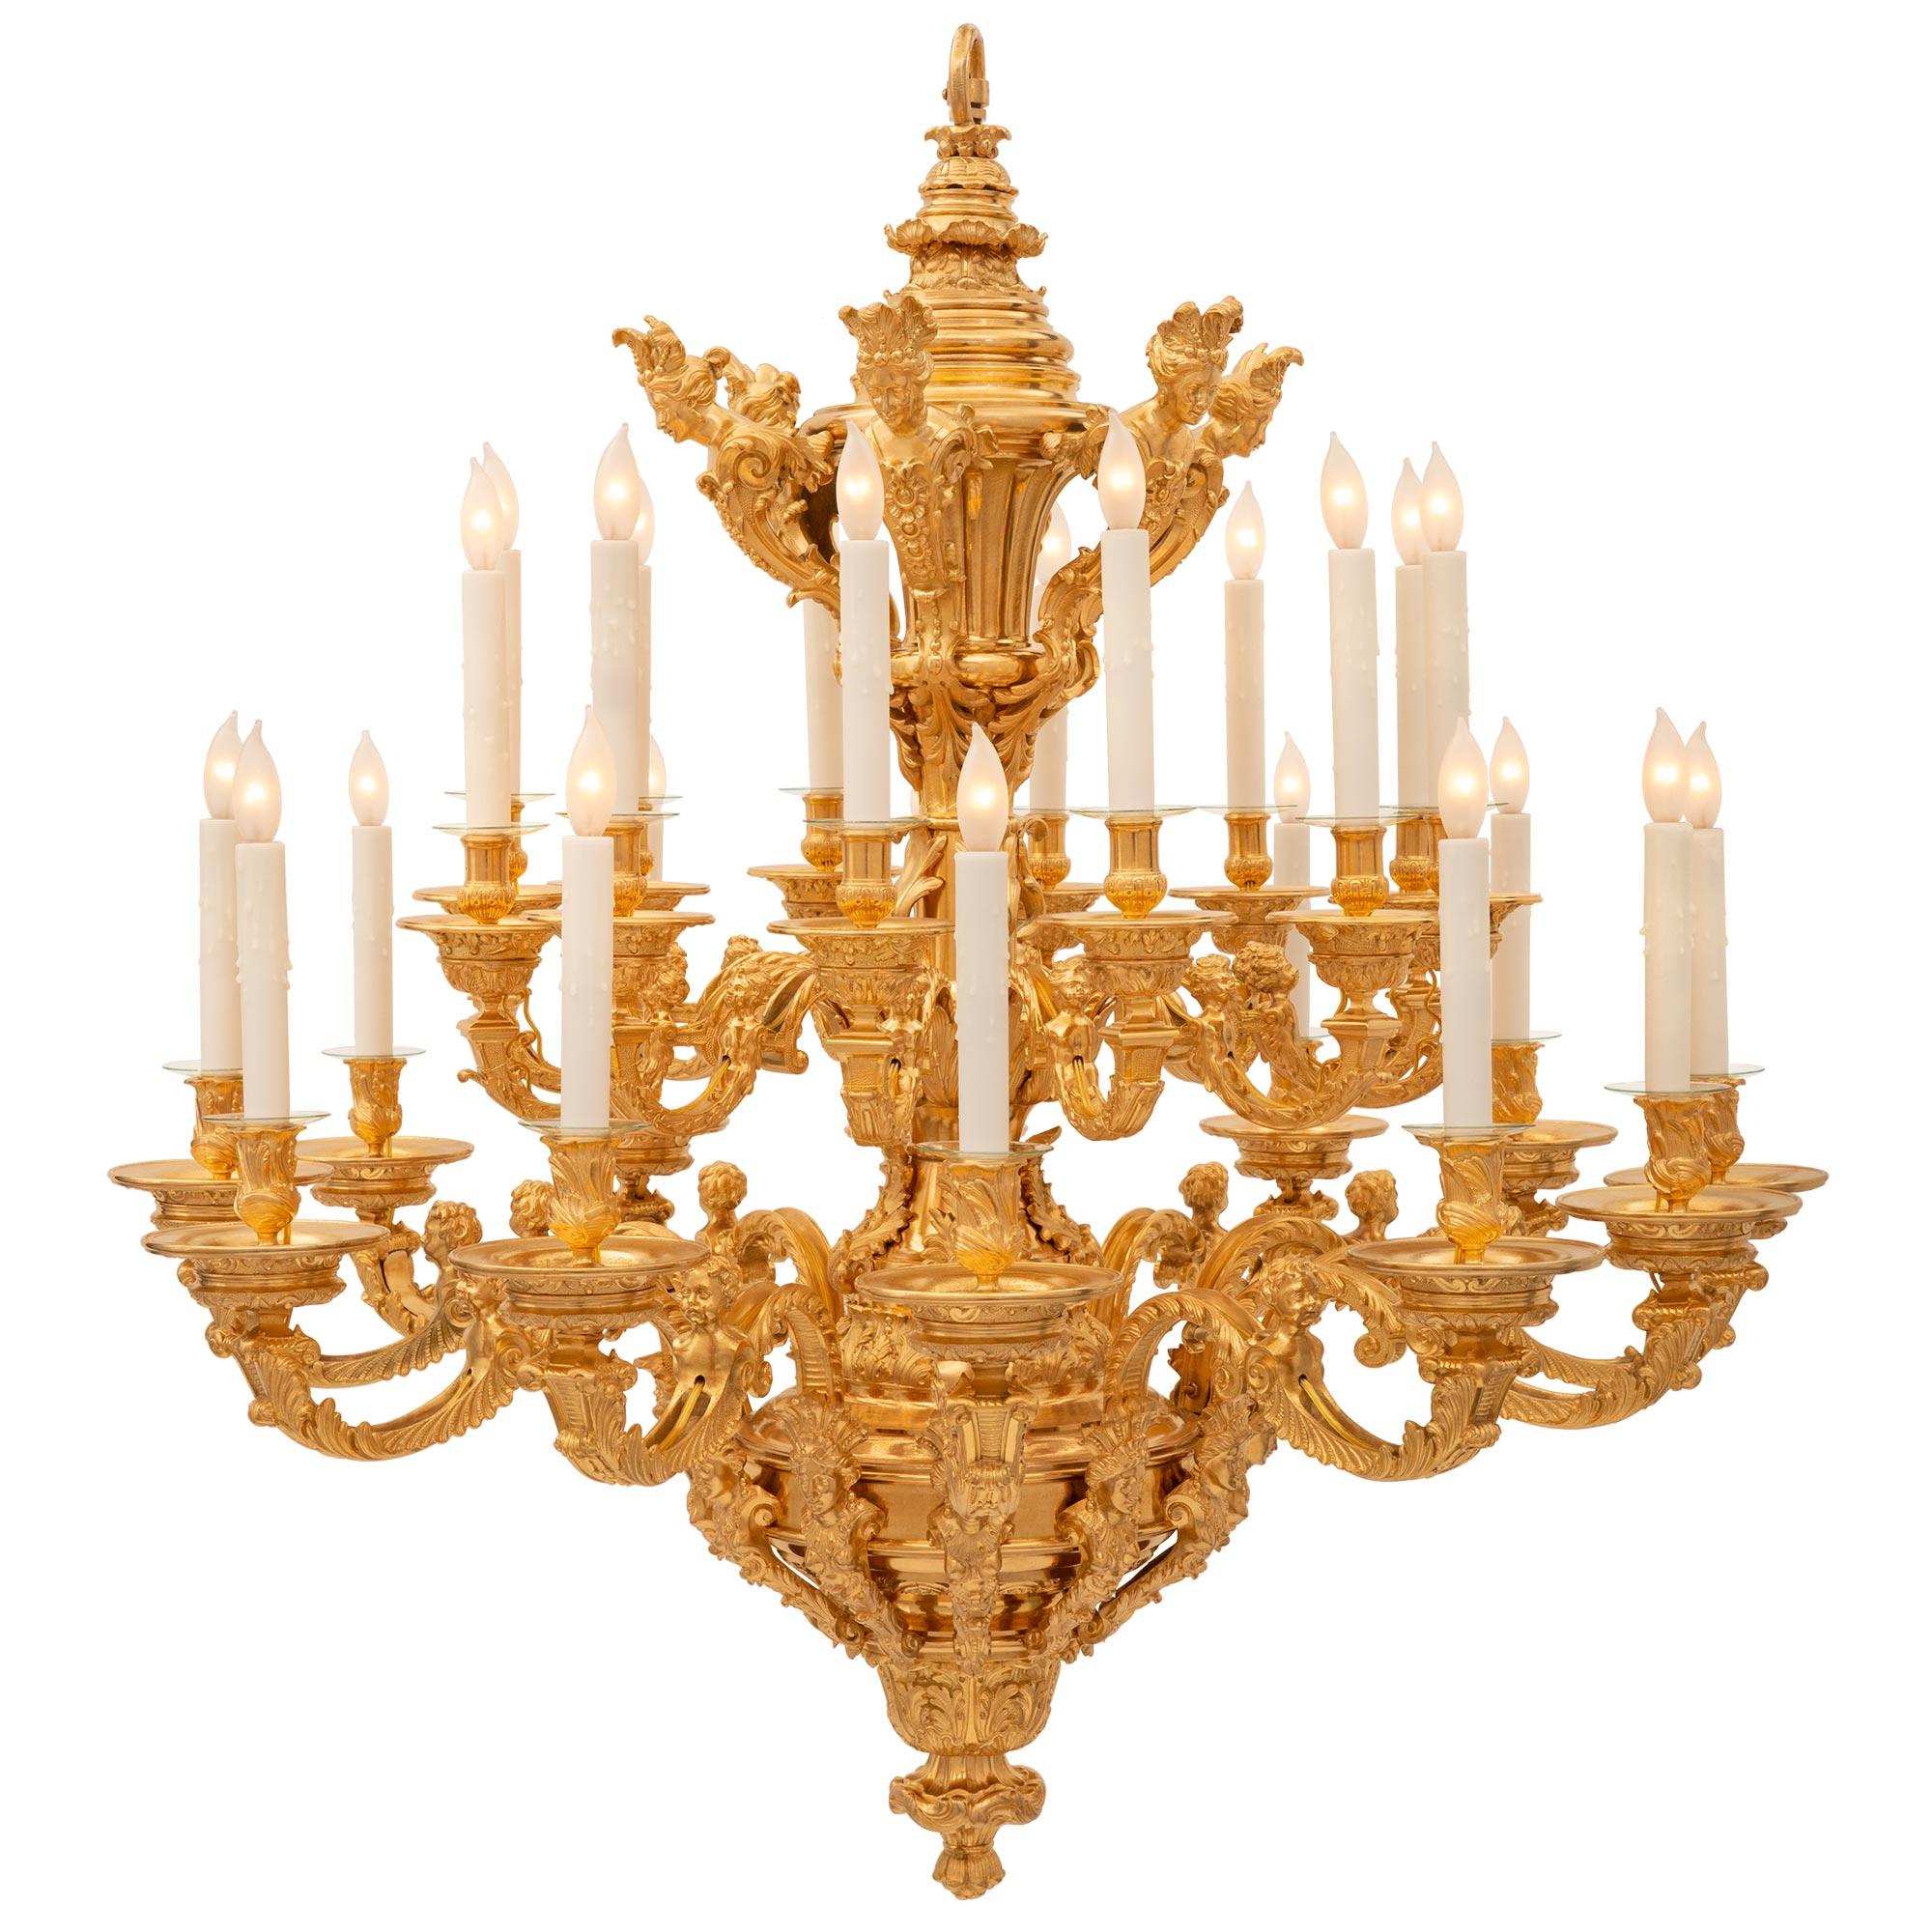 A spectacular and extremely impressive French 19th century Louis XIV st. Belle Époque period ormolu chandelier. The large scale twenty four arm chandelier is centered by a striking bottom foliate finial below large acanthus leaves and a most